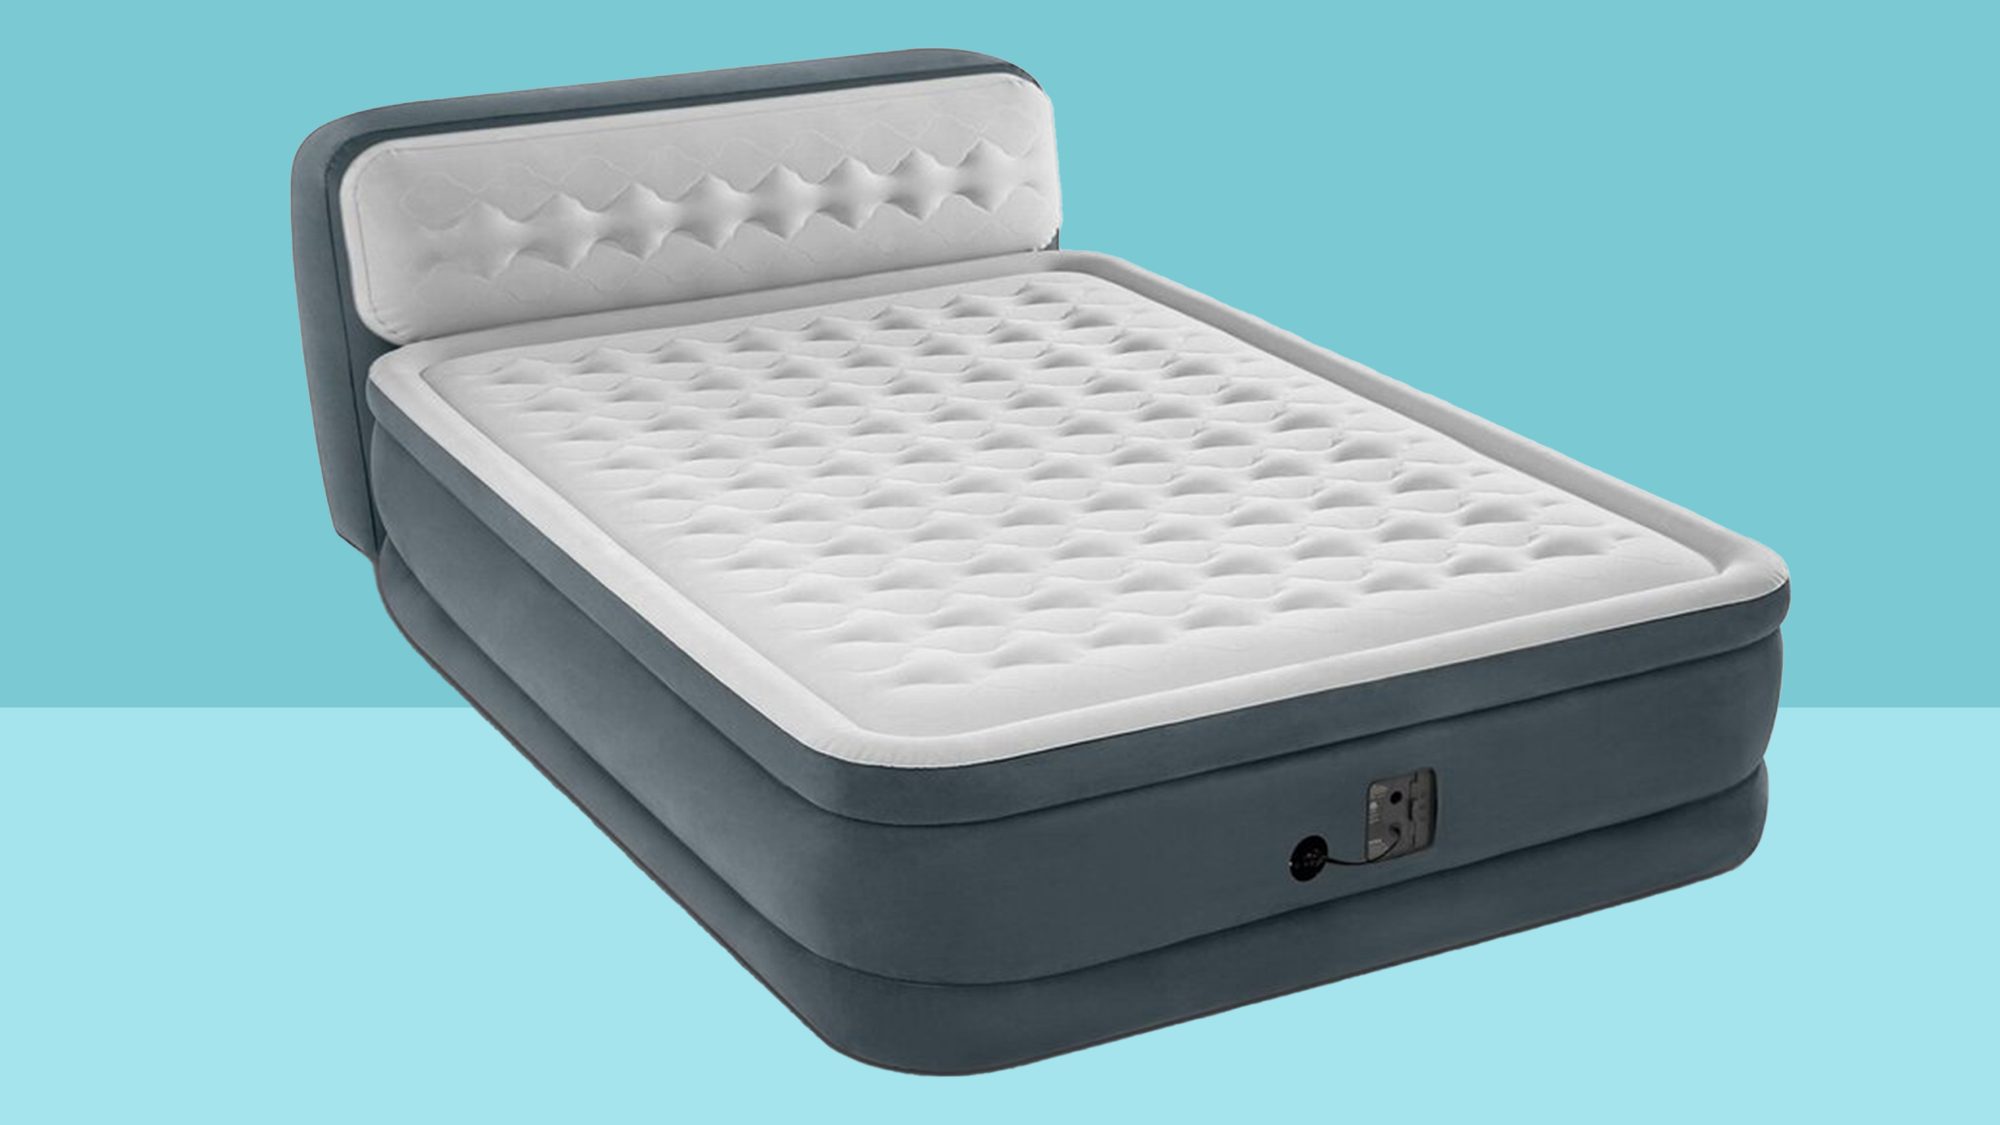 How to choose an Air Mattress – Buyer’s Guide and Review